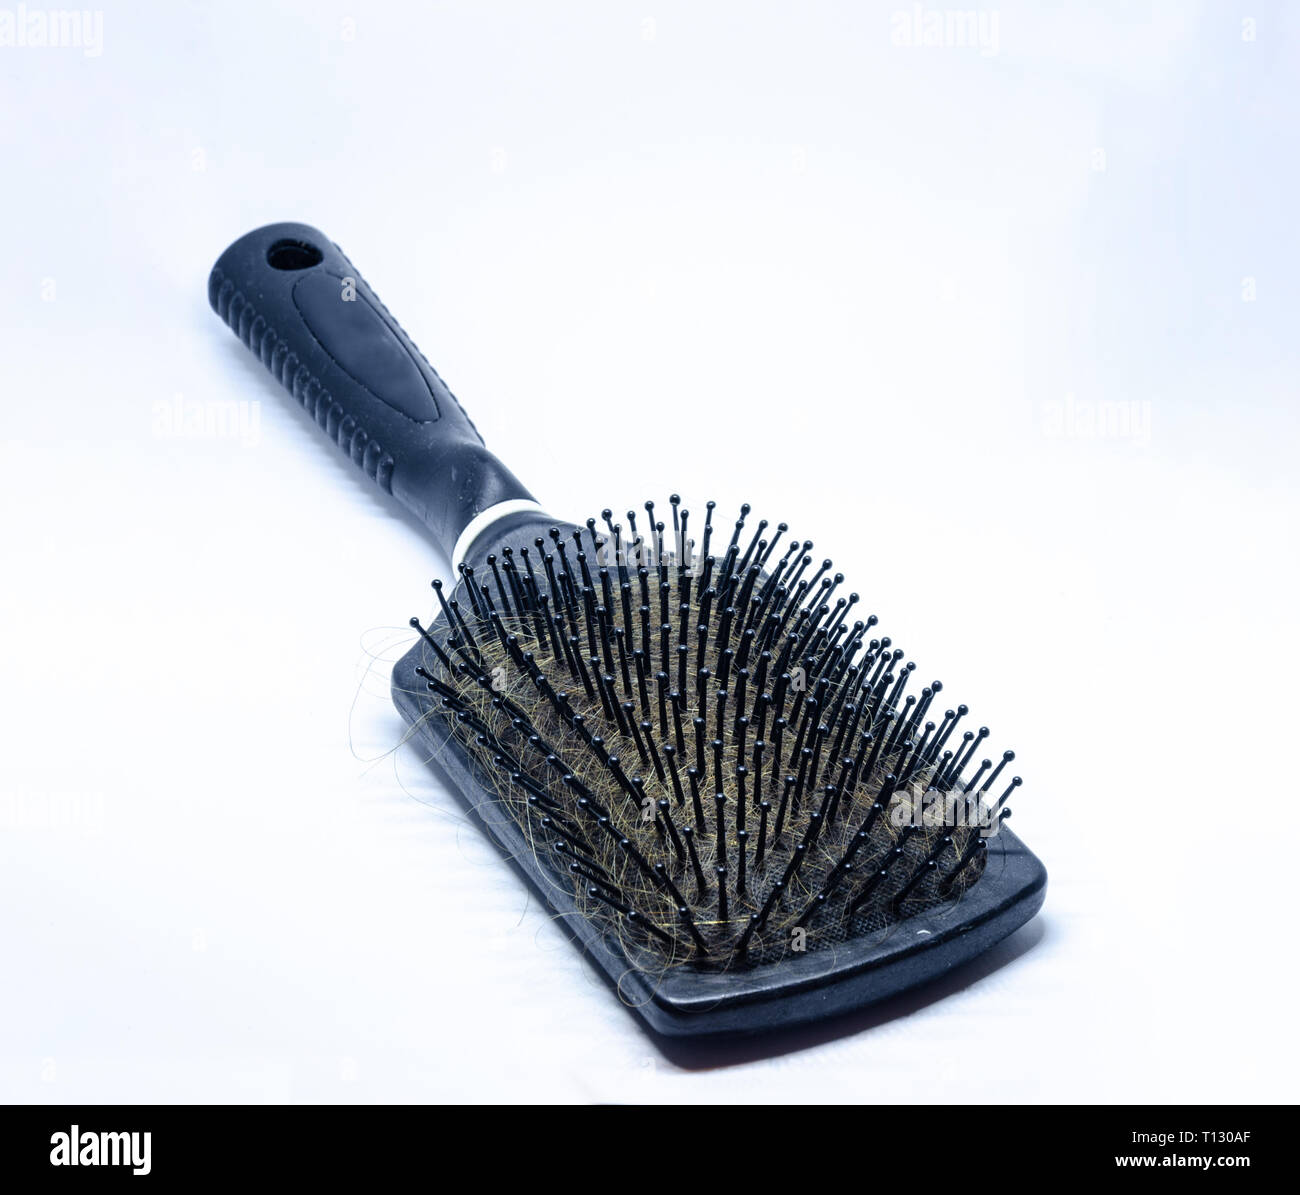 Close up view of a hair brush with hair Stock Photo